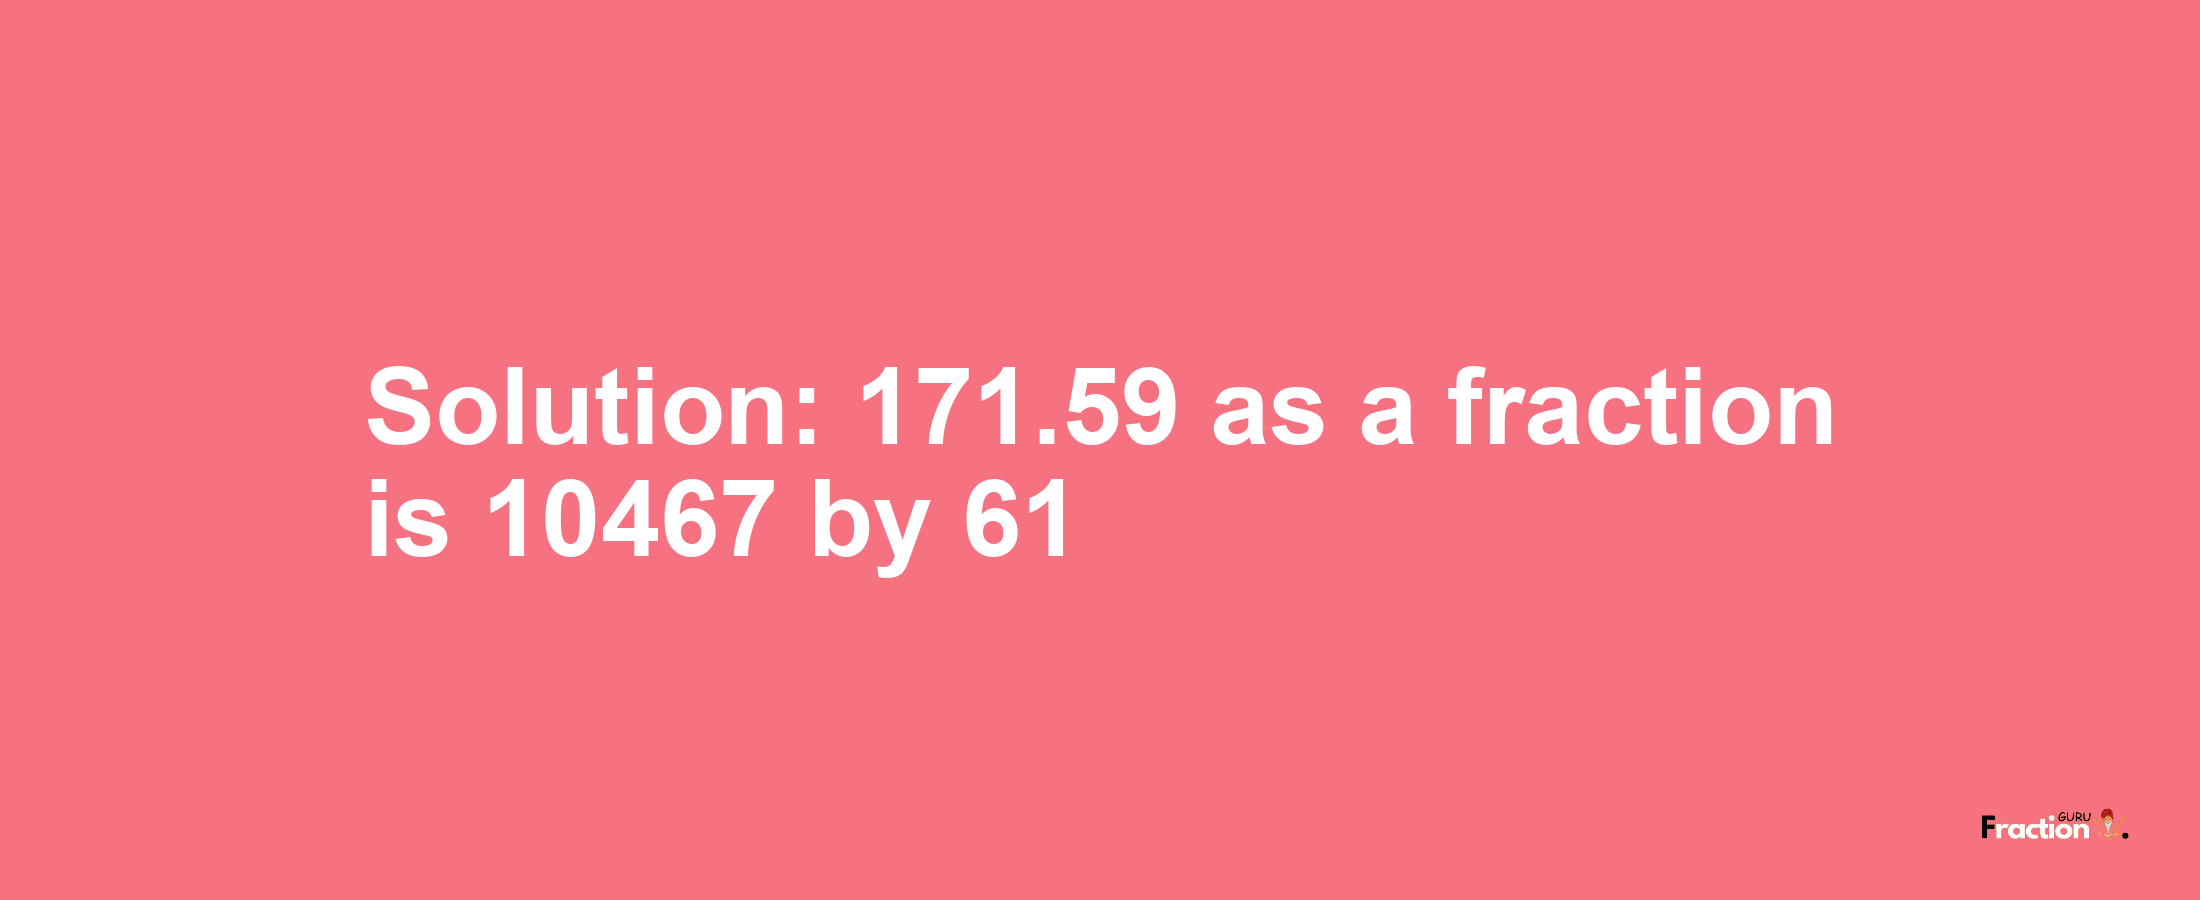 Solution:171.59 as a fraction is 10467/61